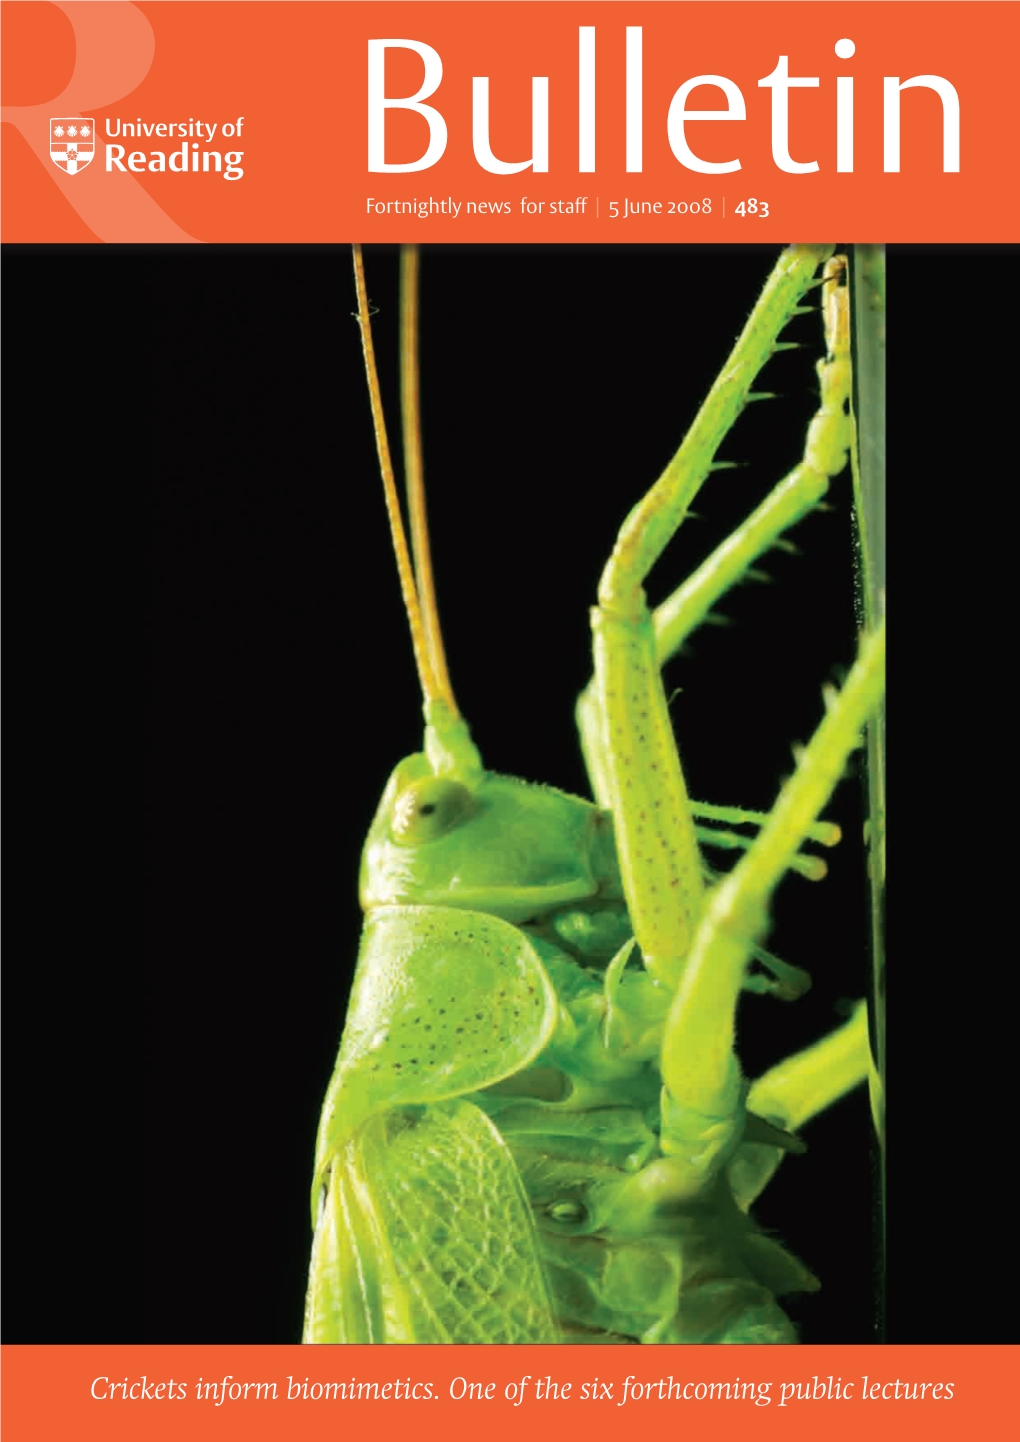 Crickets Inform Biomimetics. One of the Six Forthcoming Public Lectures As a World-Renowned Research and Teaching 483